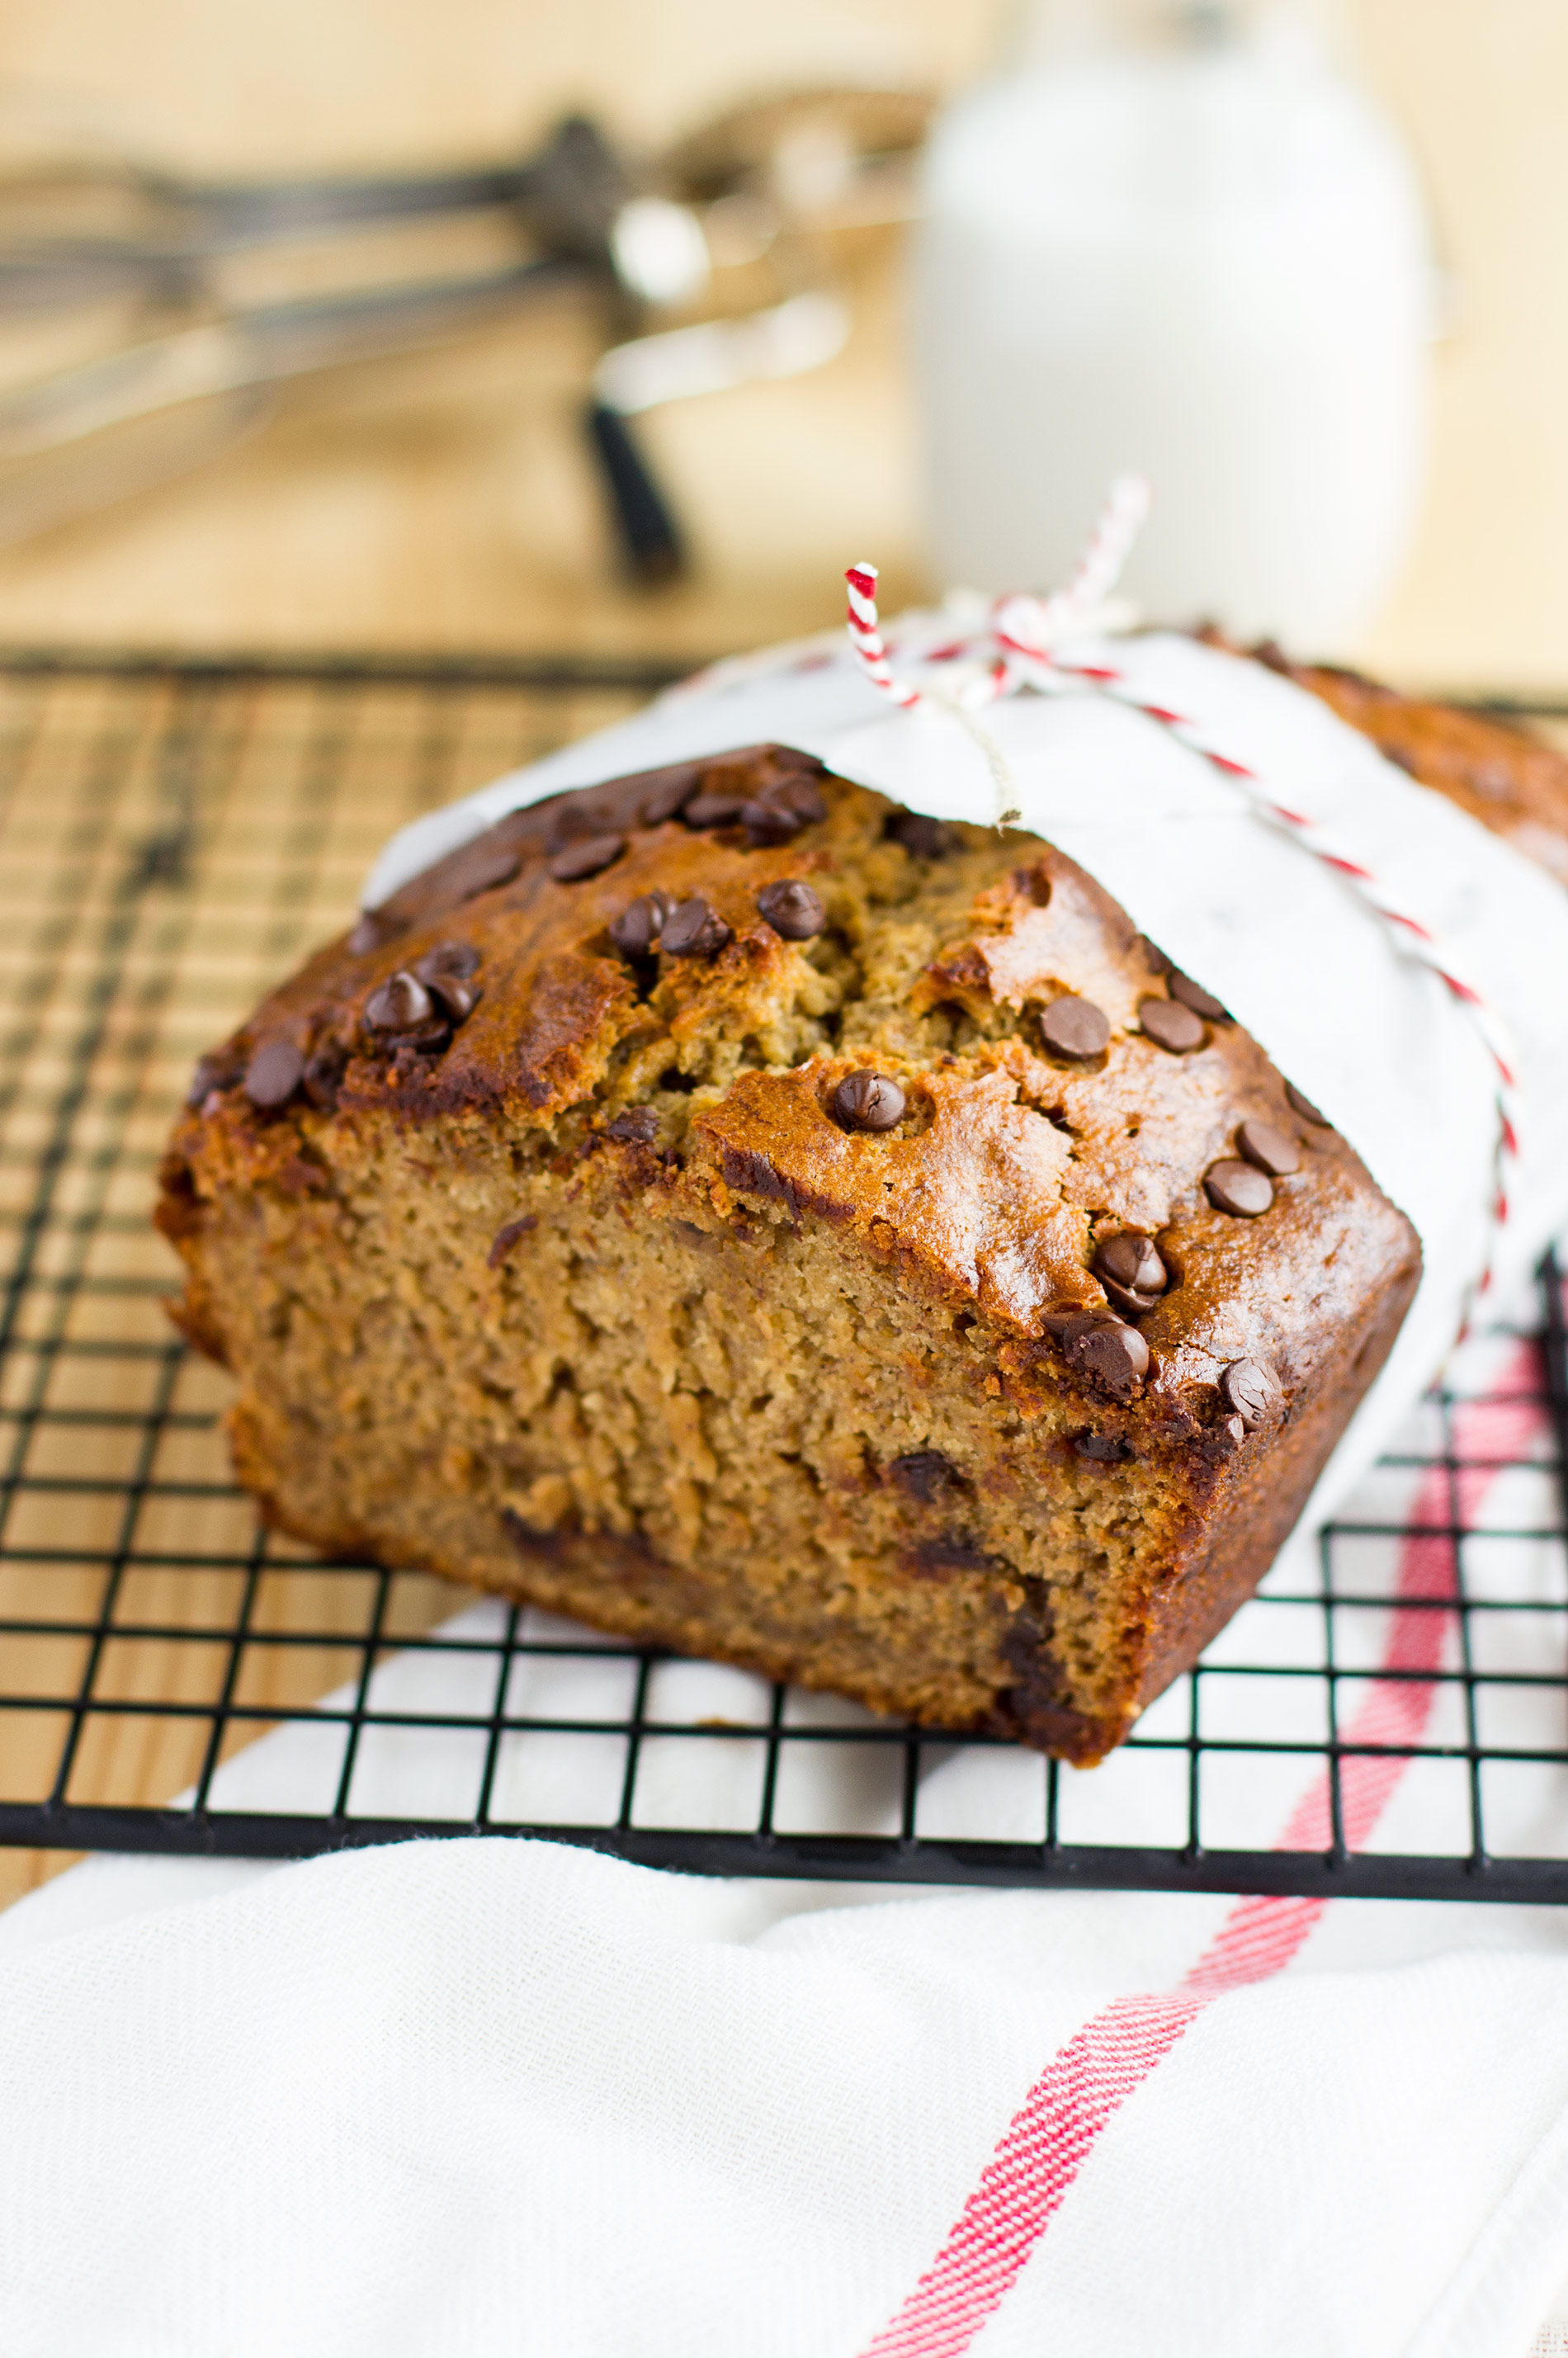 Gramma's Chocolate Chip Banana Bread • Brittany Stager